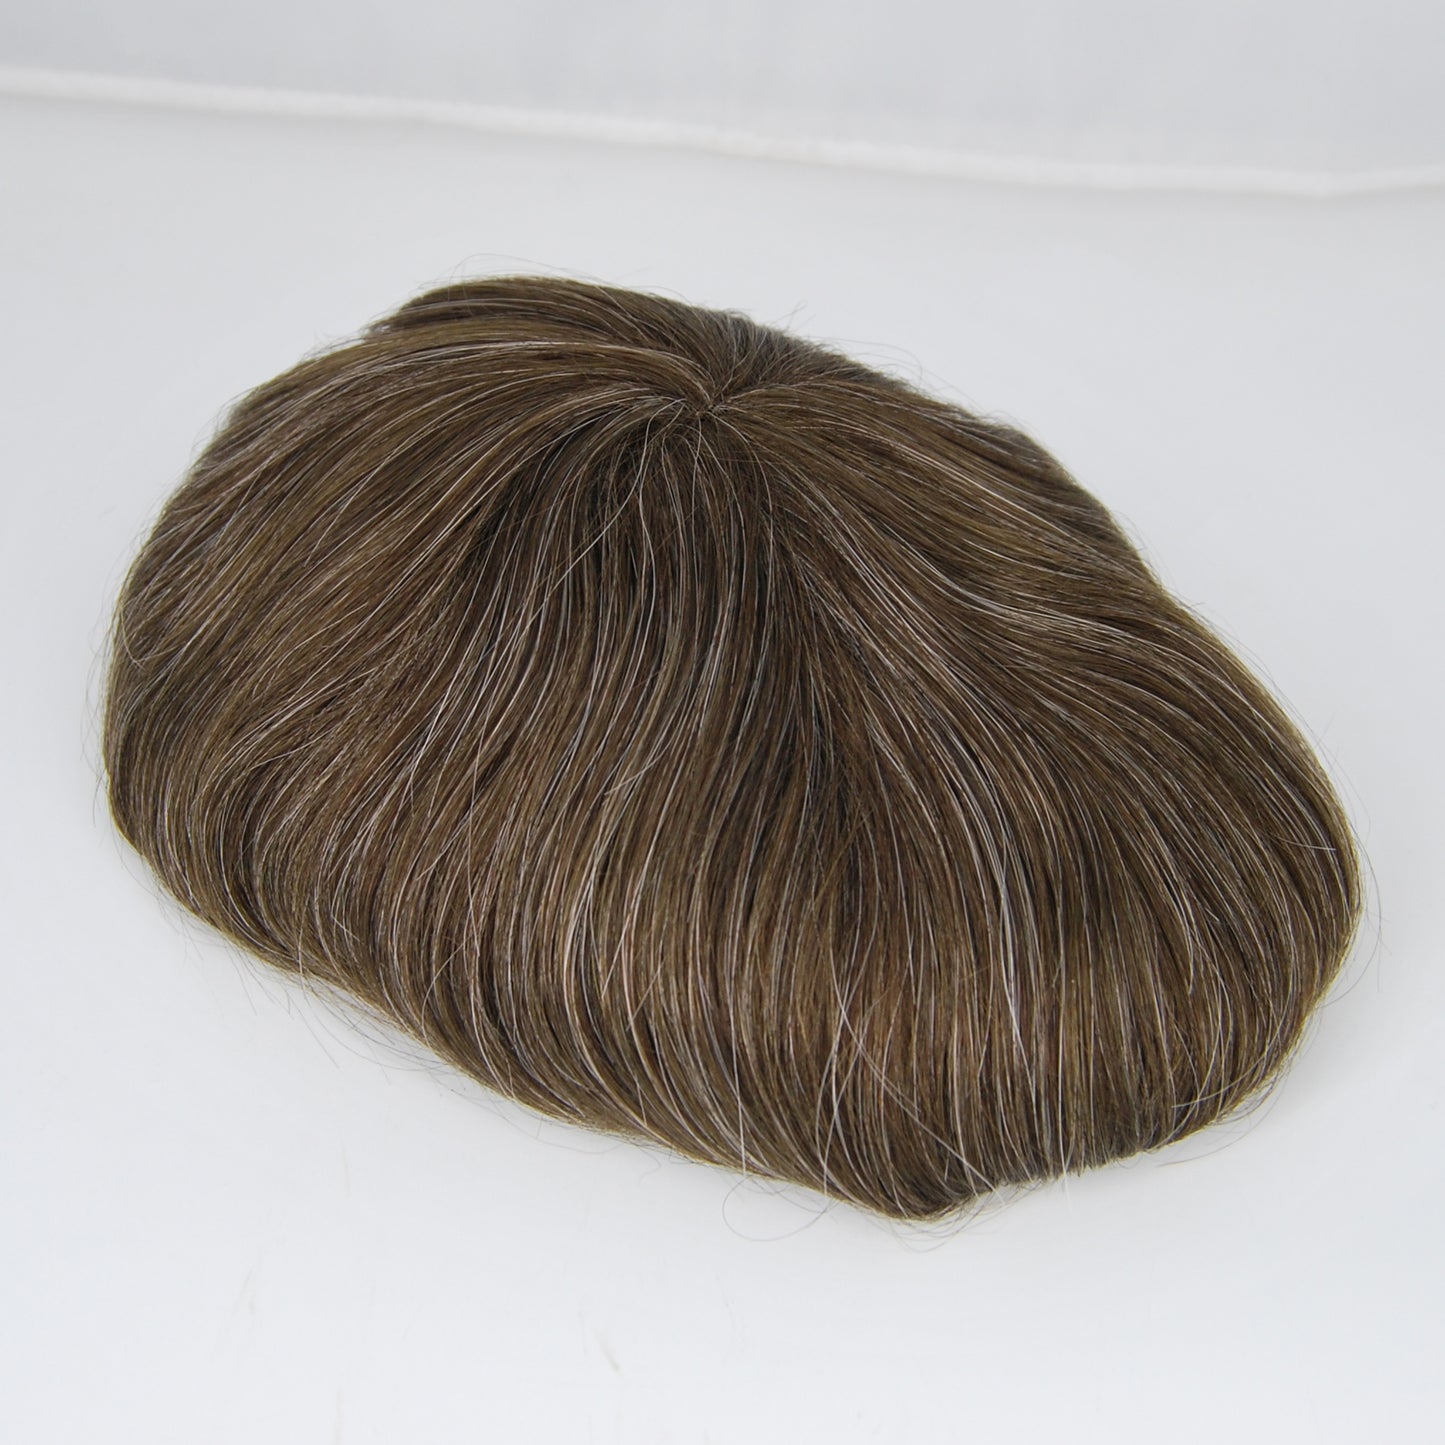 Clearance toupee dark brown mixed 20% grey hair piece for men all french lace durable breathable hair system